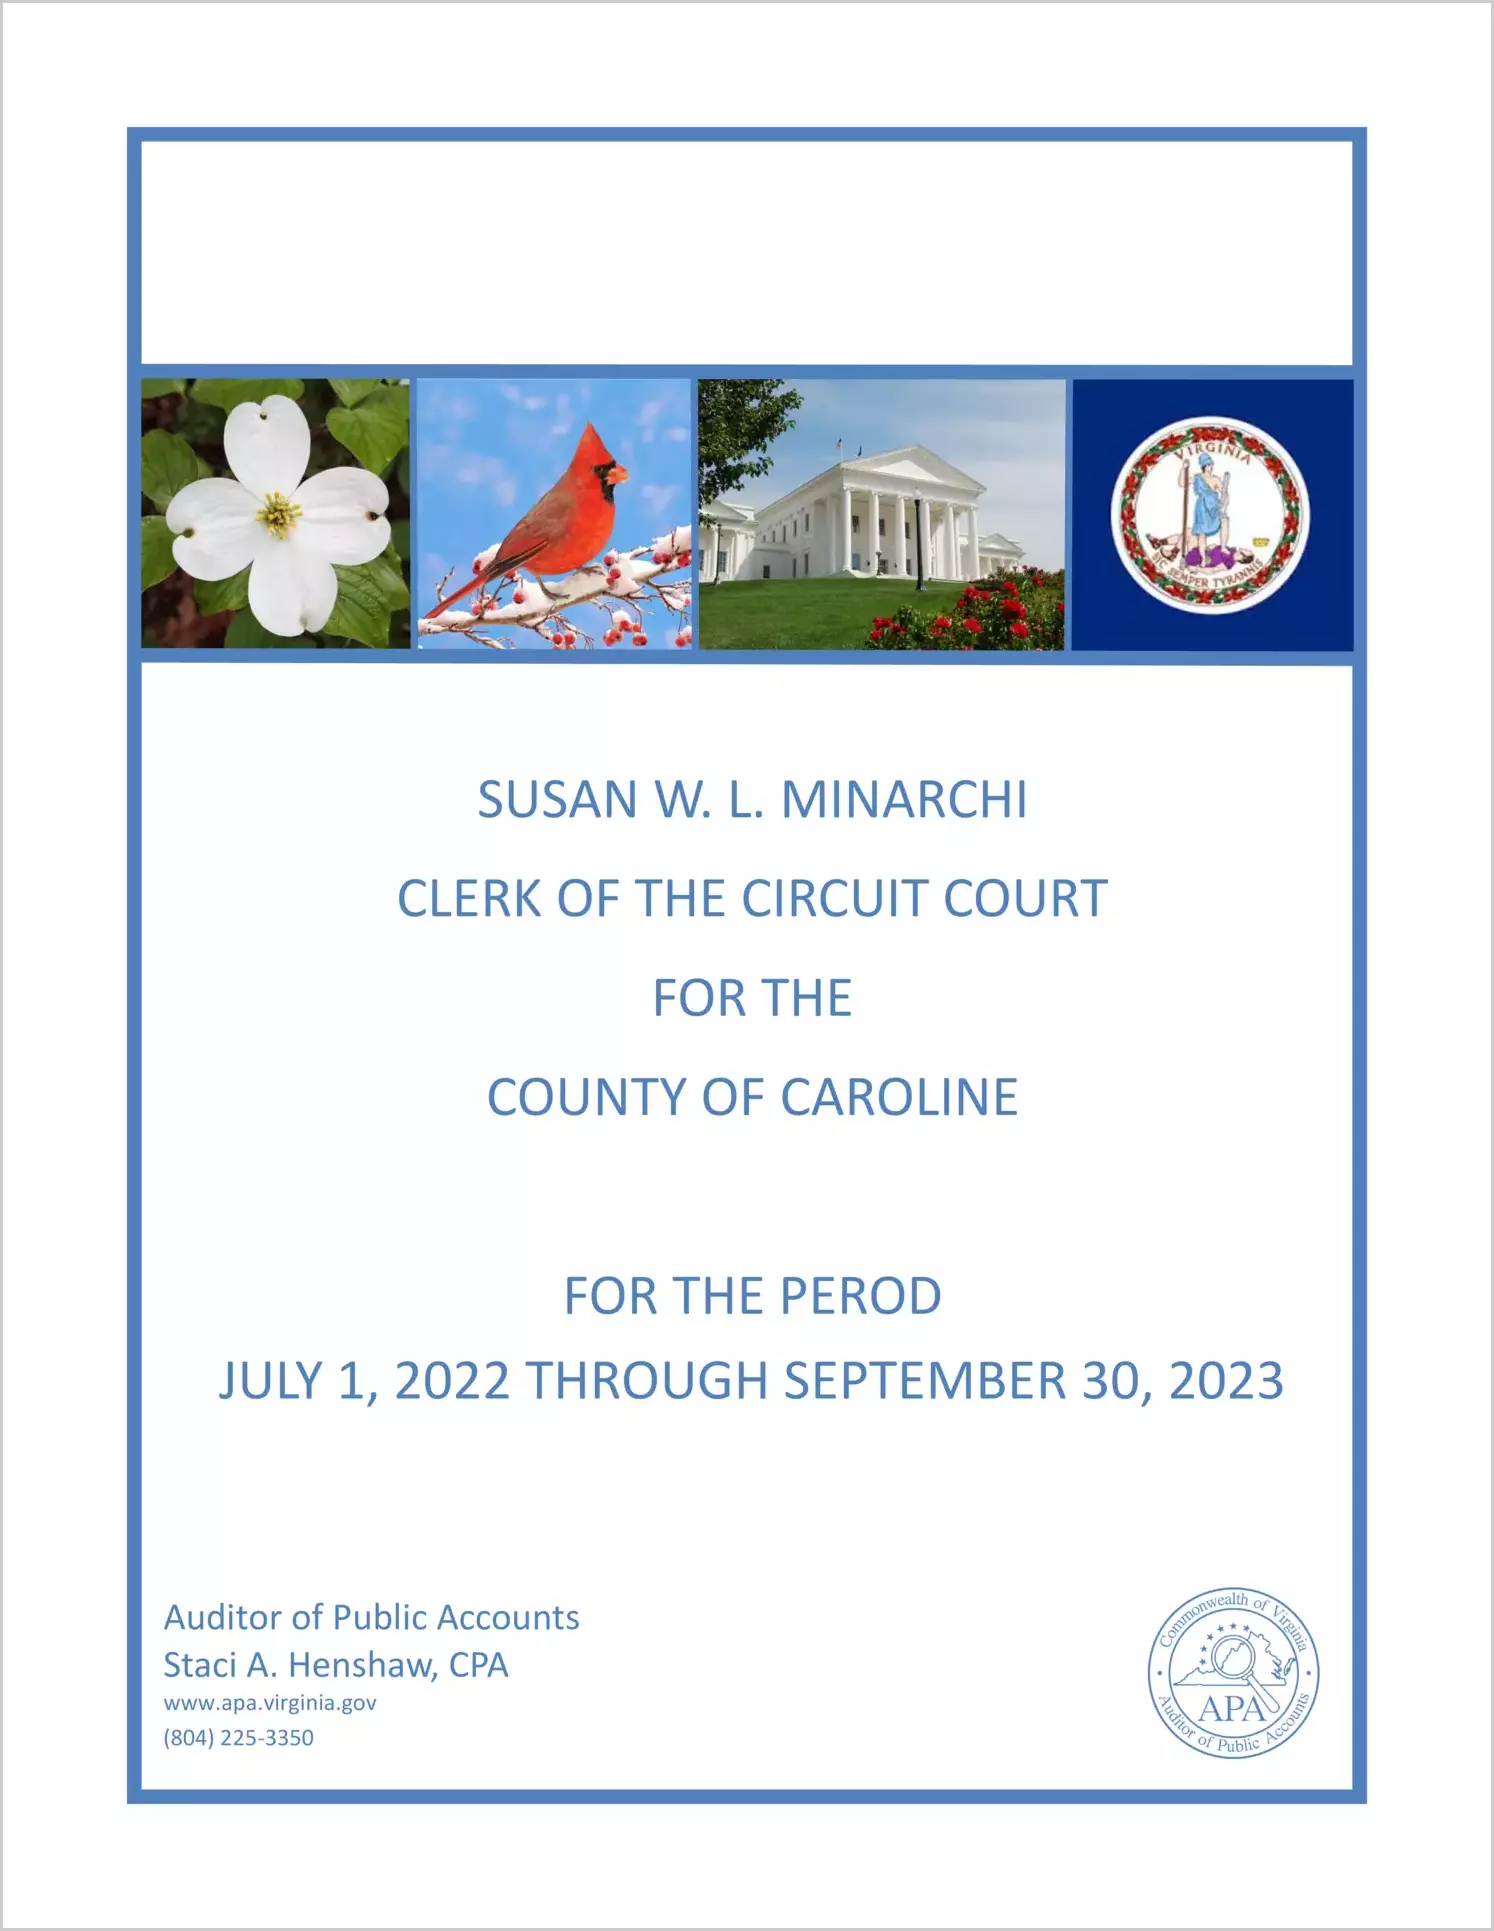 Clerk of the Circuit Court for the County of Caroline for the period July 1, 2022 through September 30, 2023